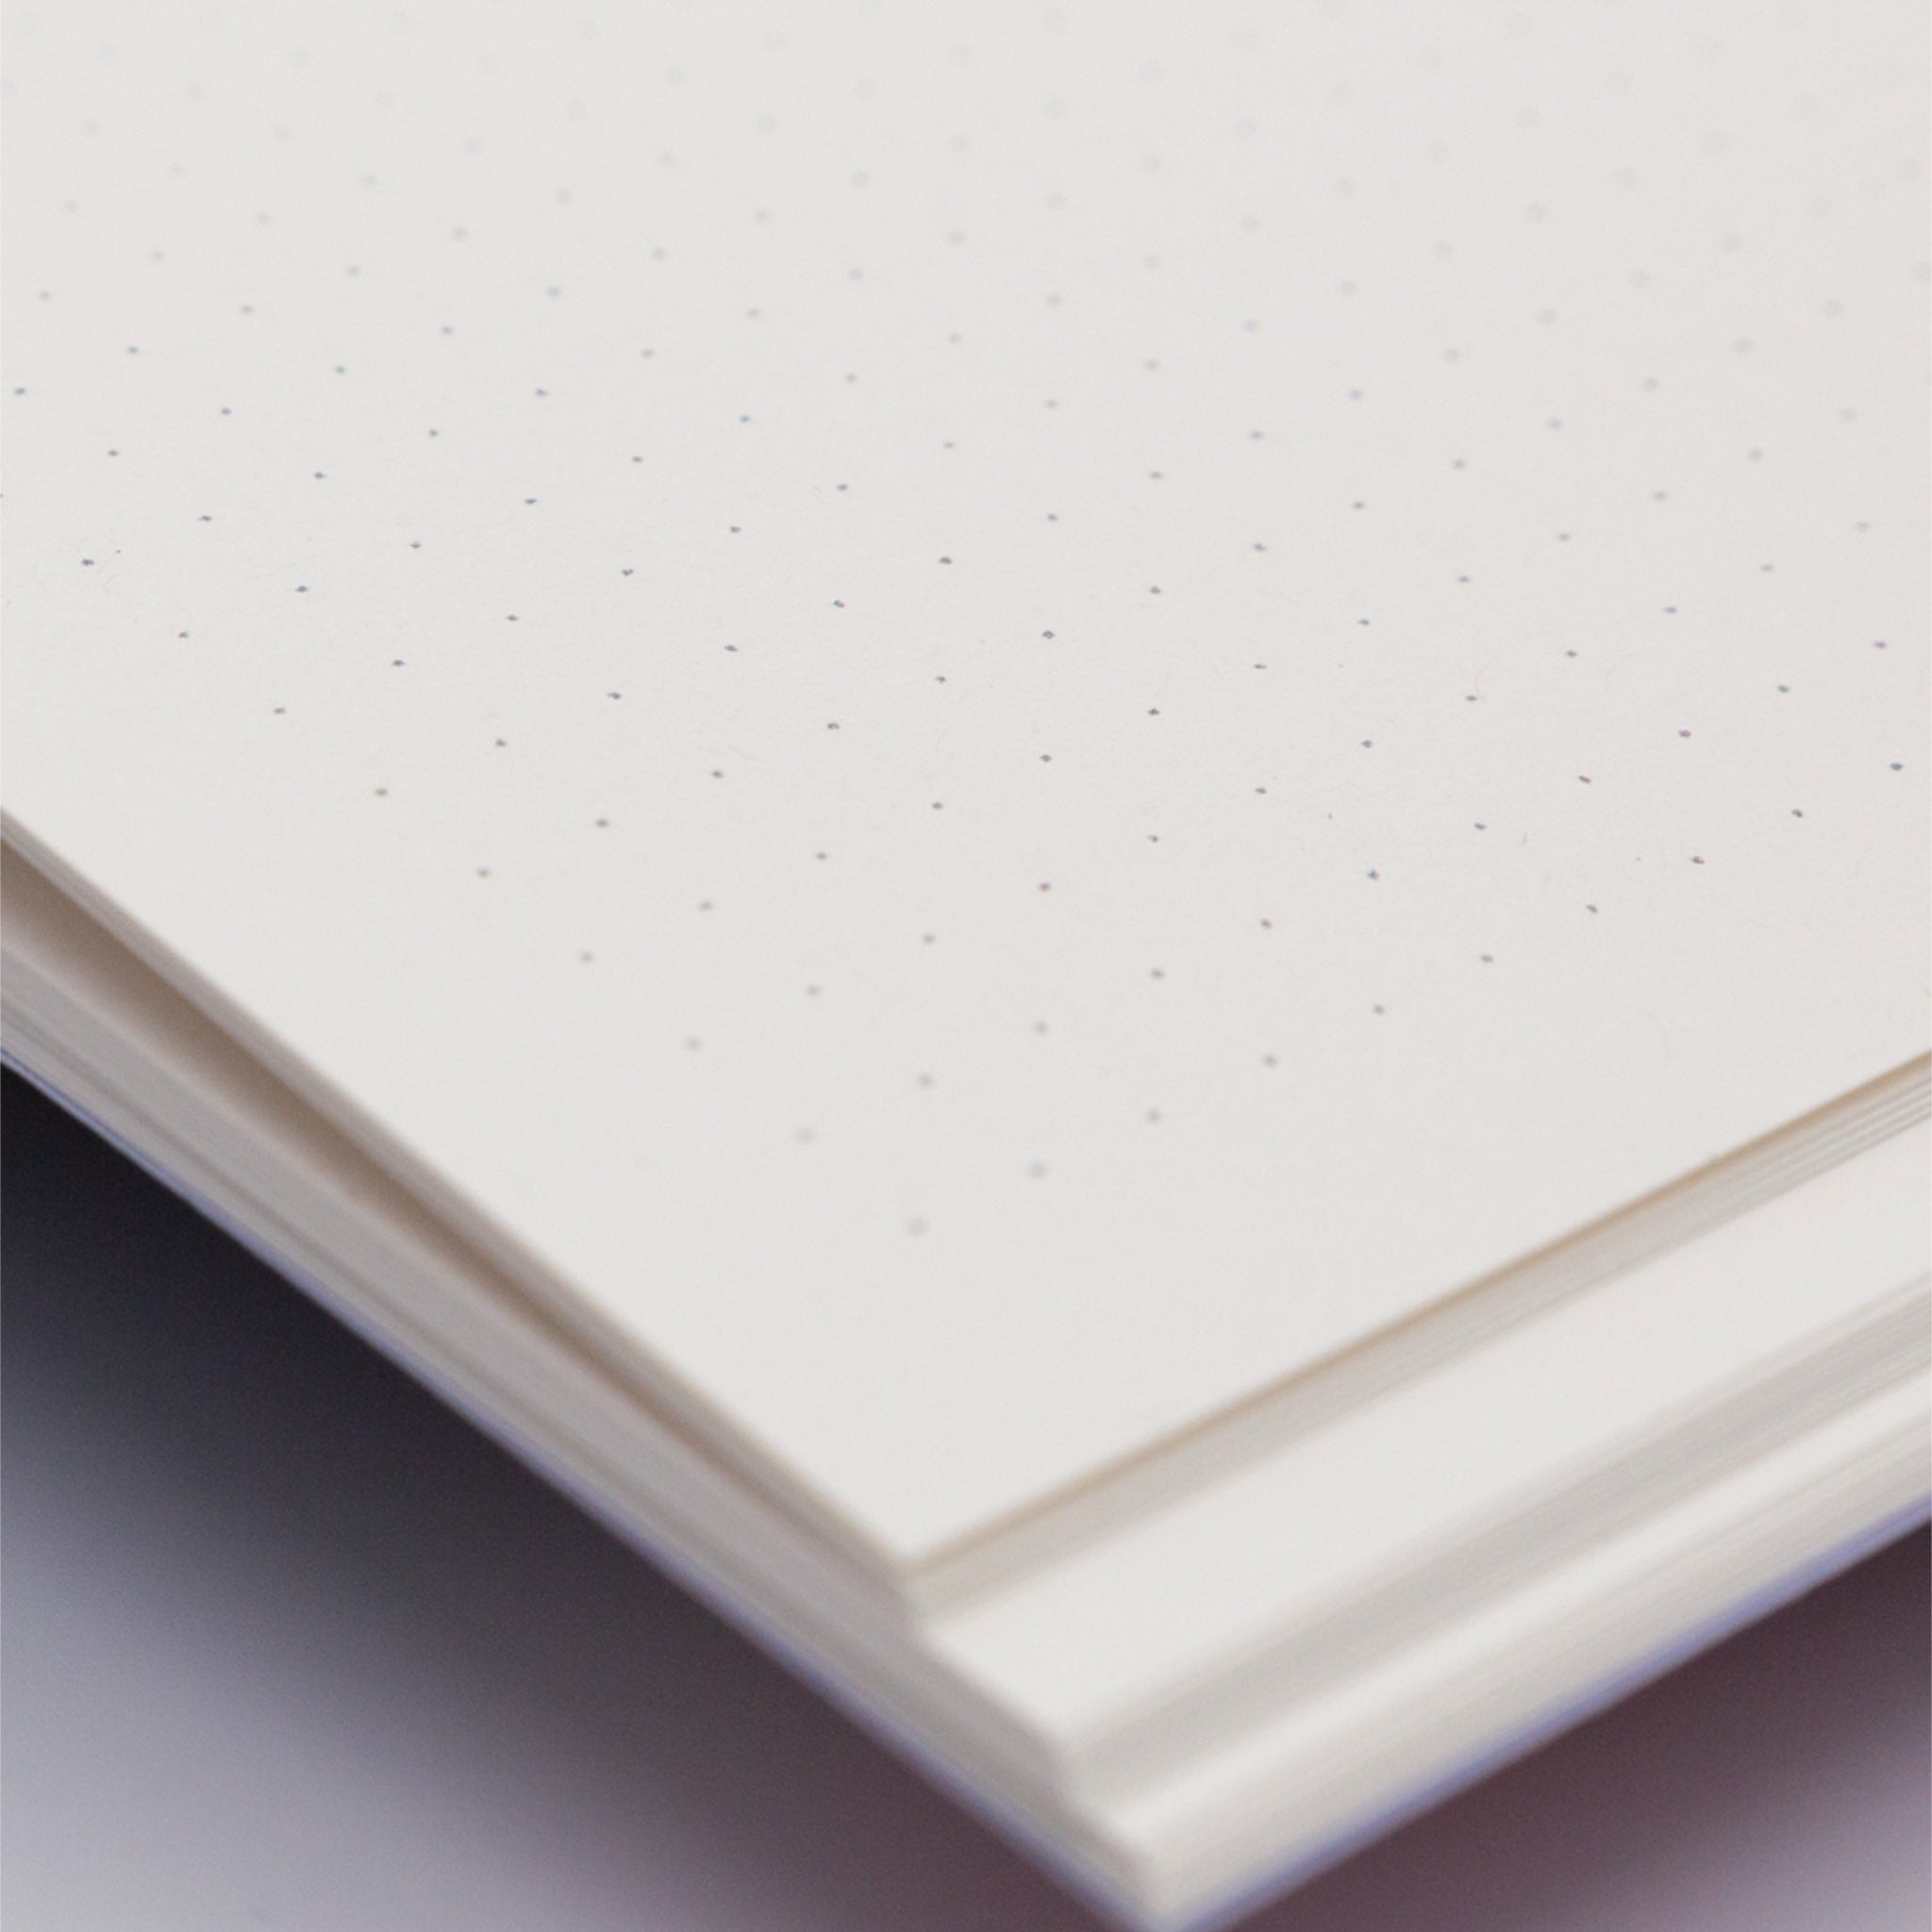 Dotted fabric covered notebook bullet journal